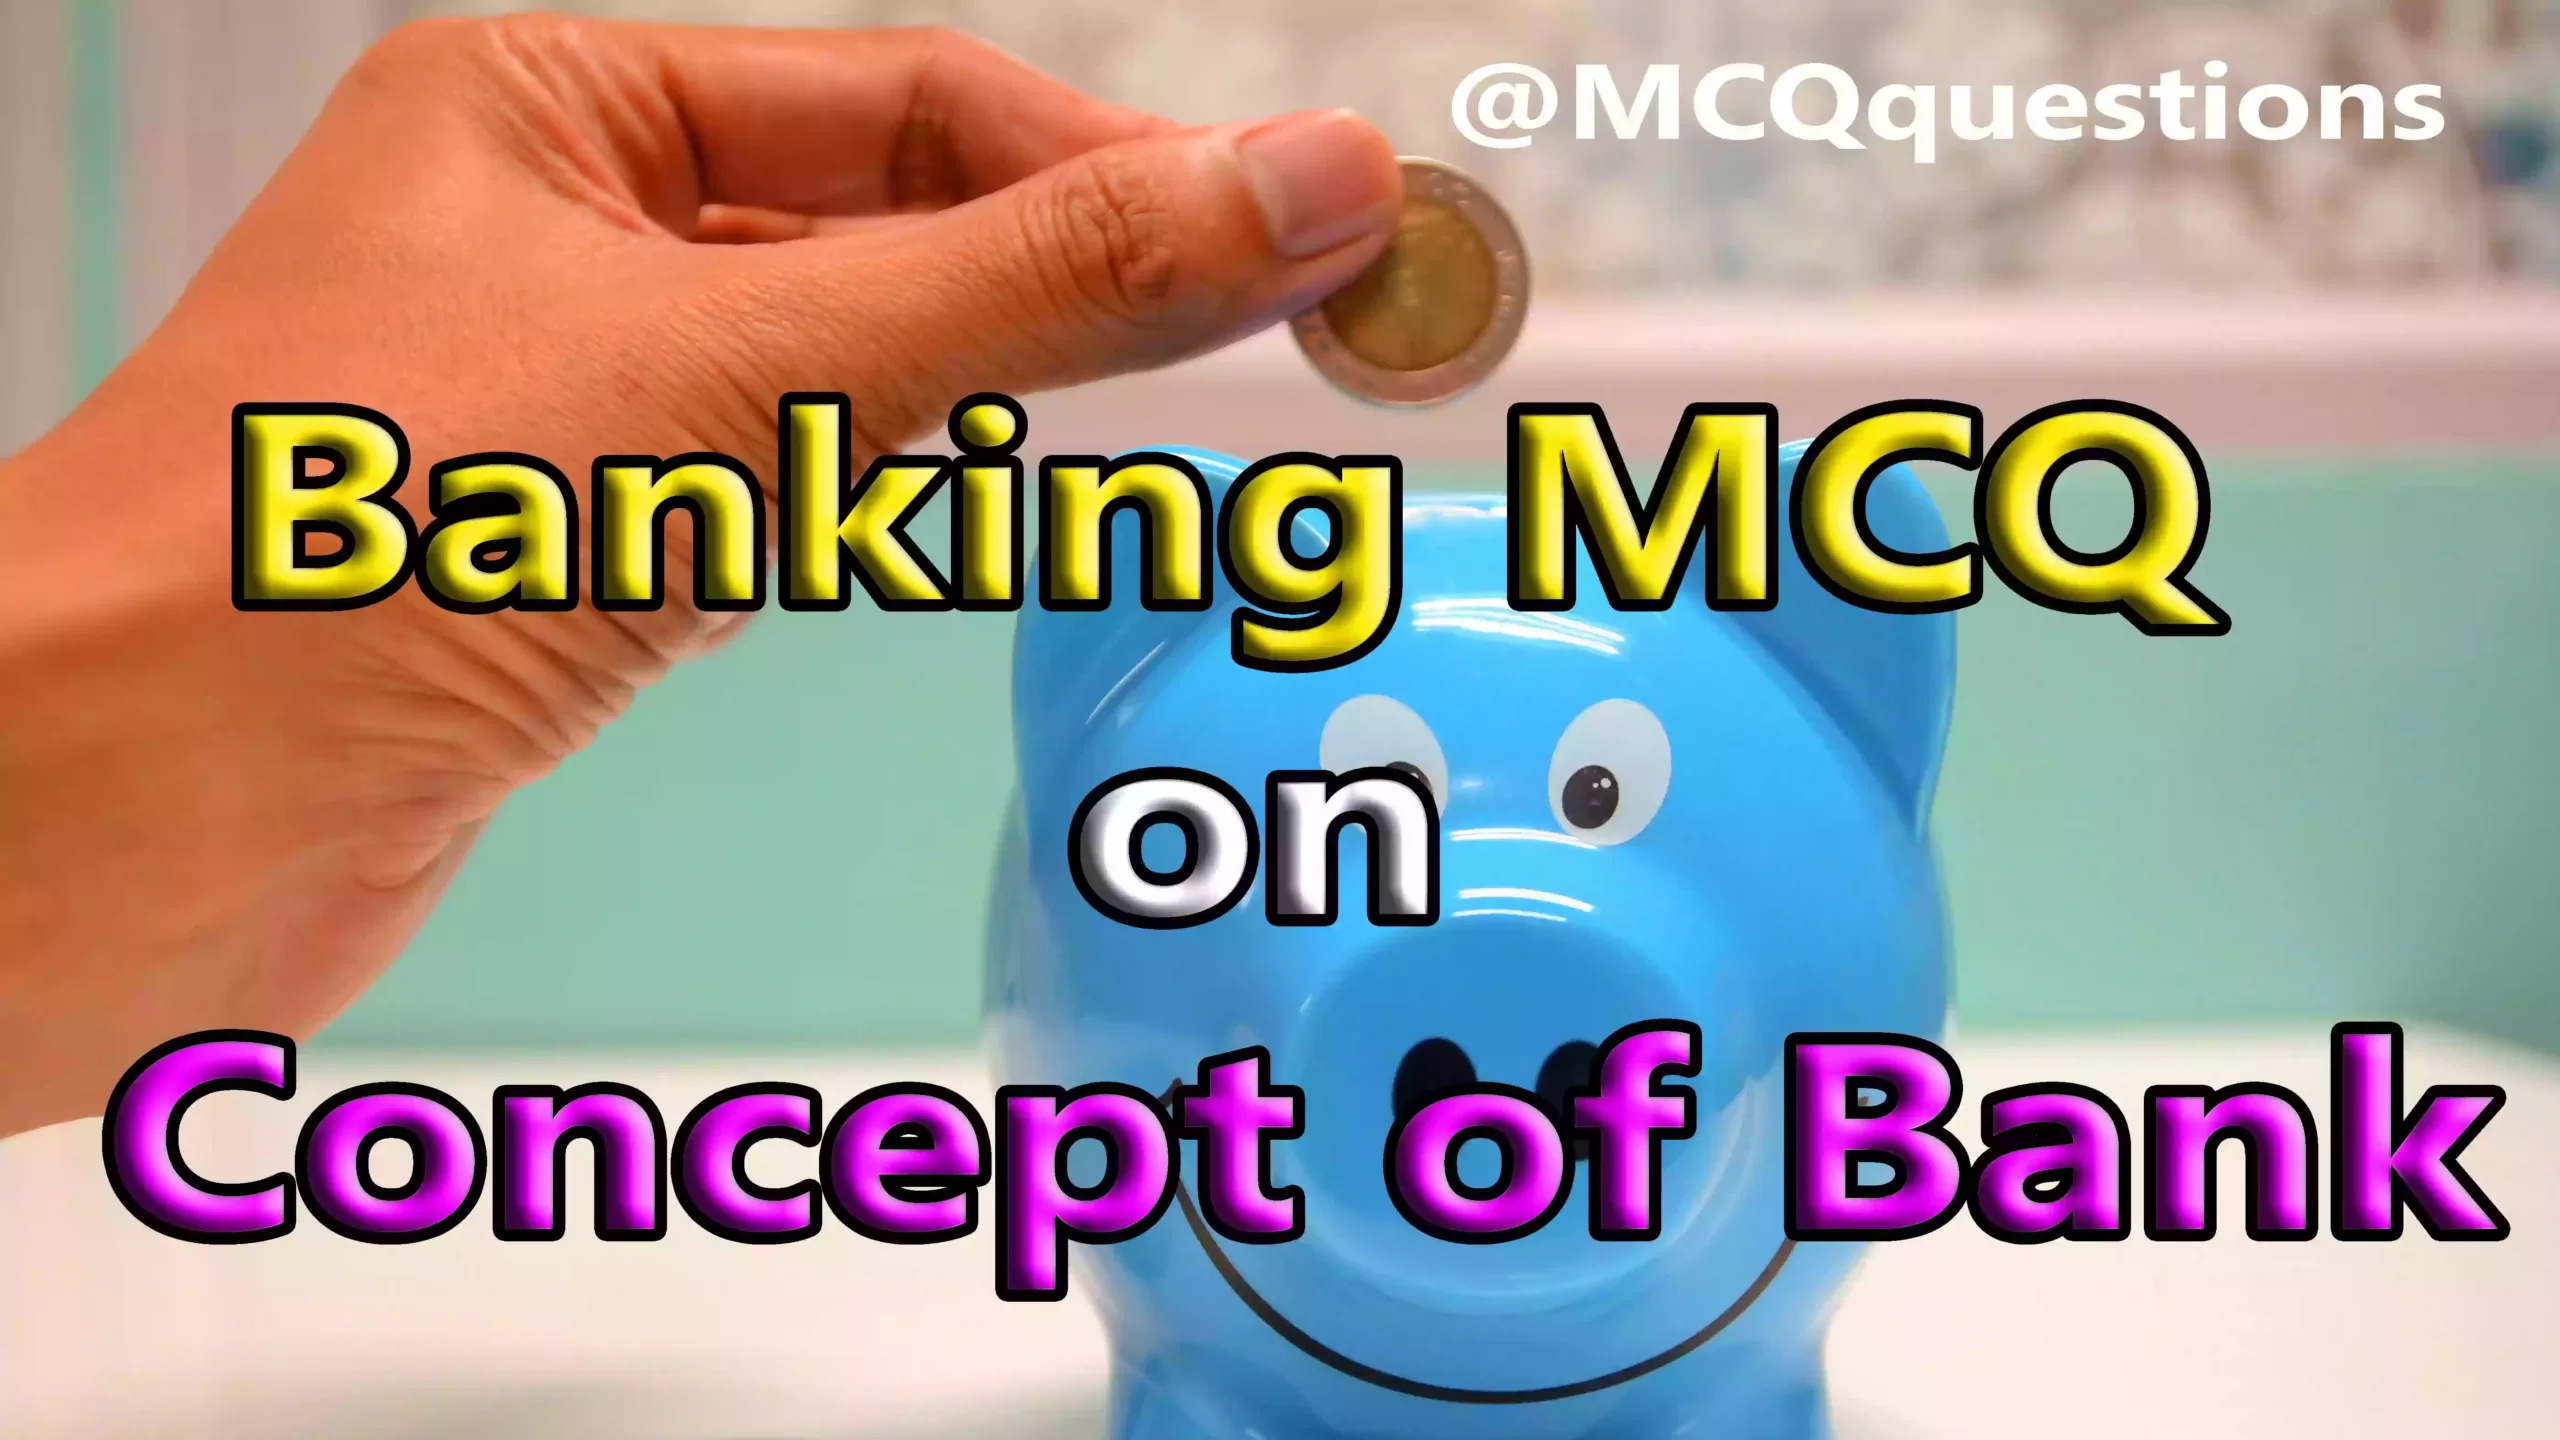 Banking MCQ on Concept of Bank